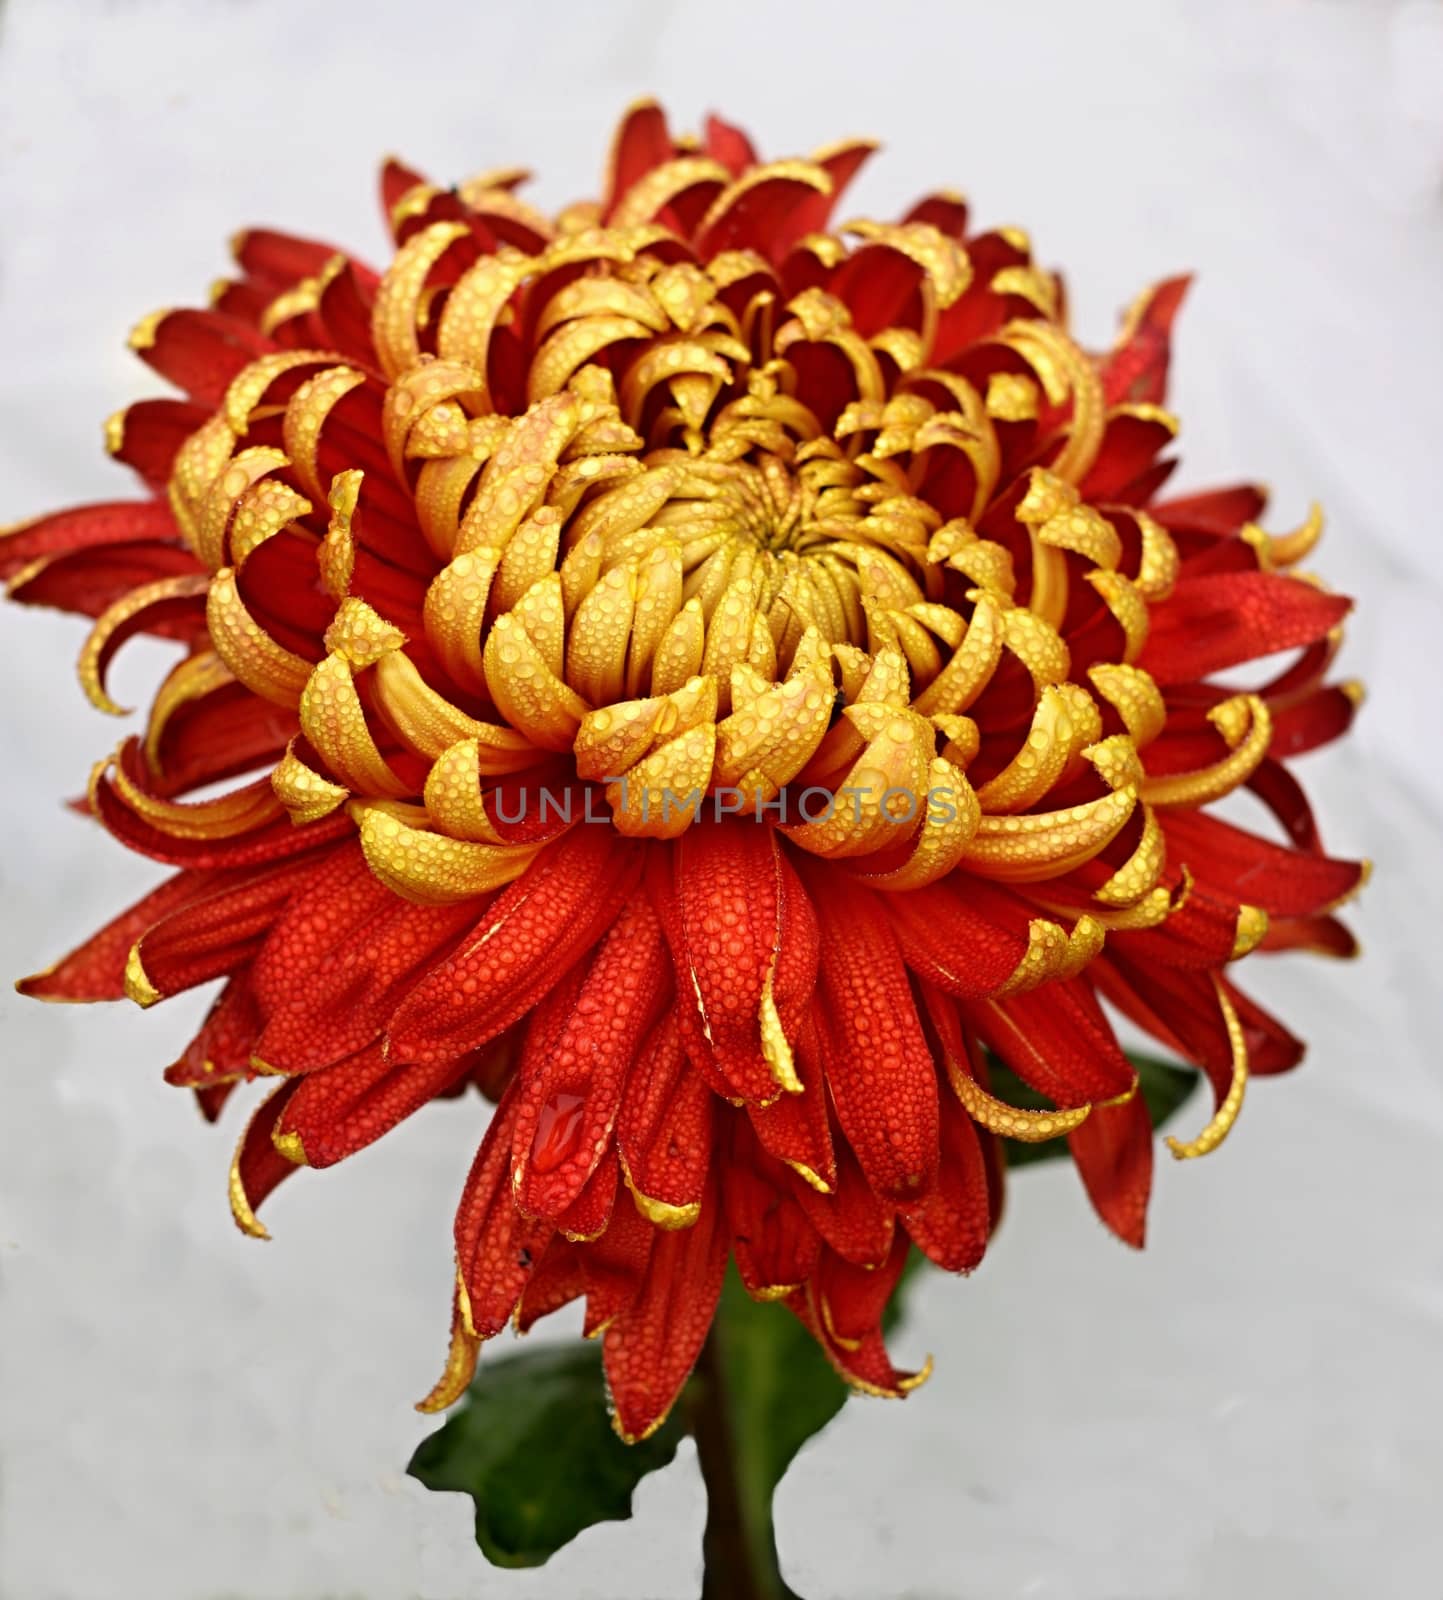 Gold and red dahlia in the rain  by jnerad